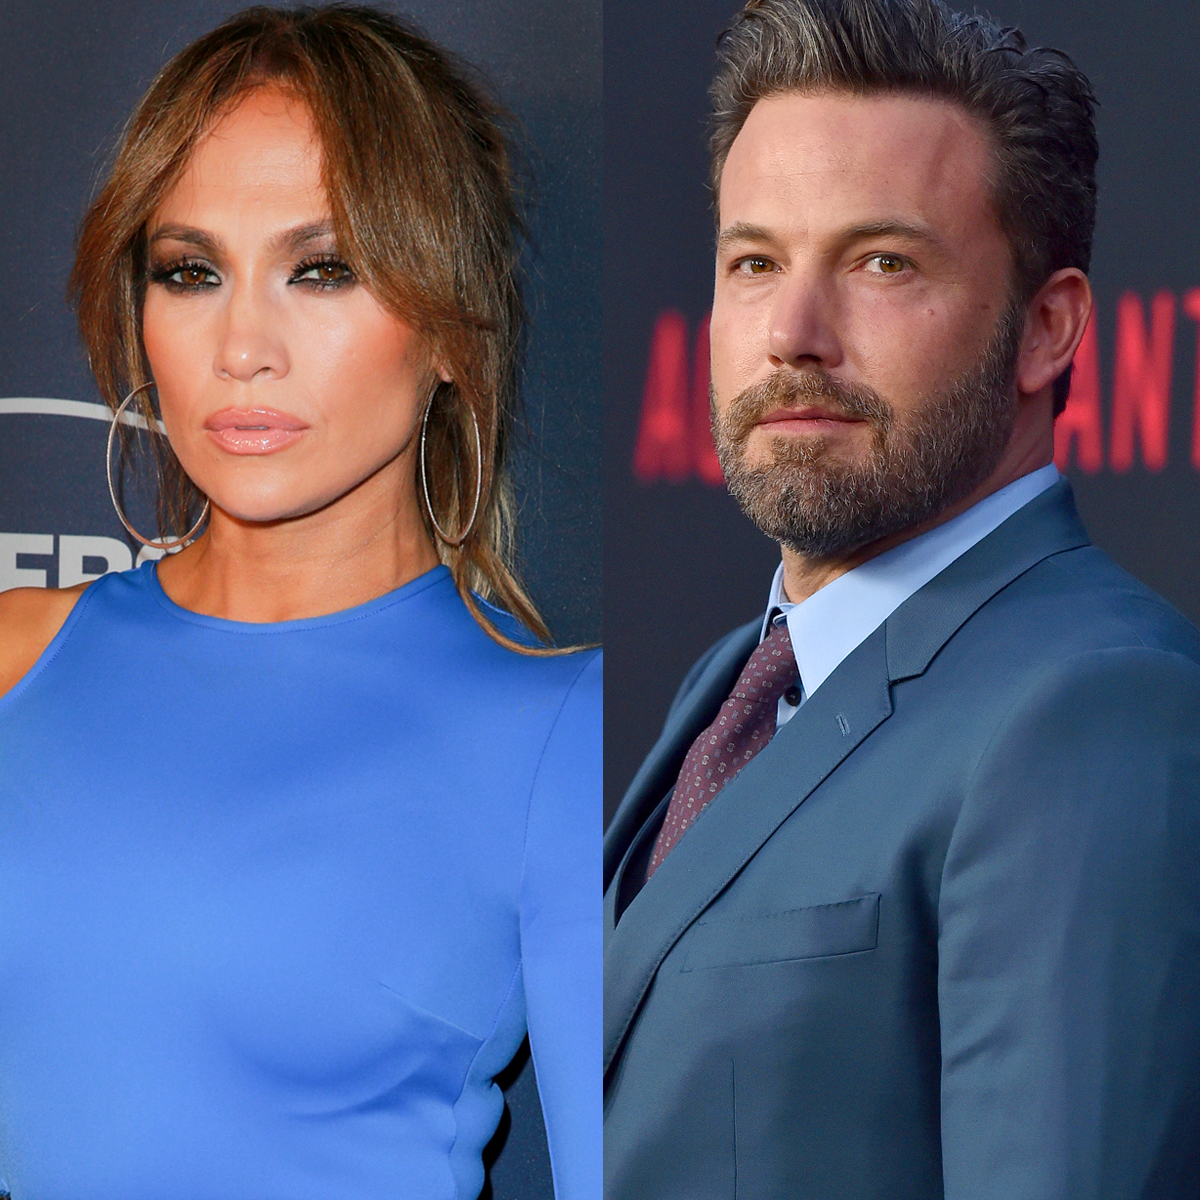 All the Details on J.Lo and Ben Affleck’s Beach Day With Matt Damon